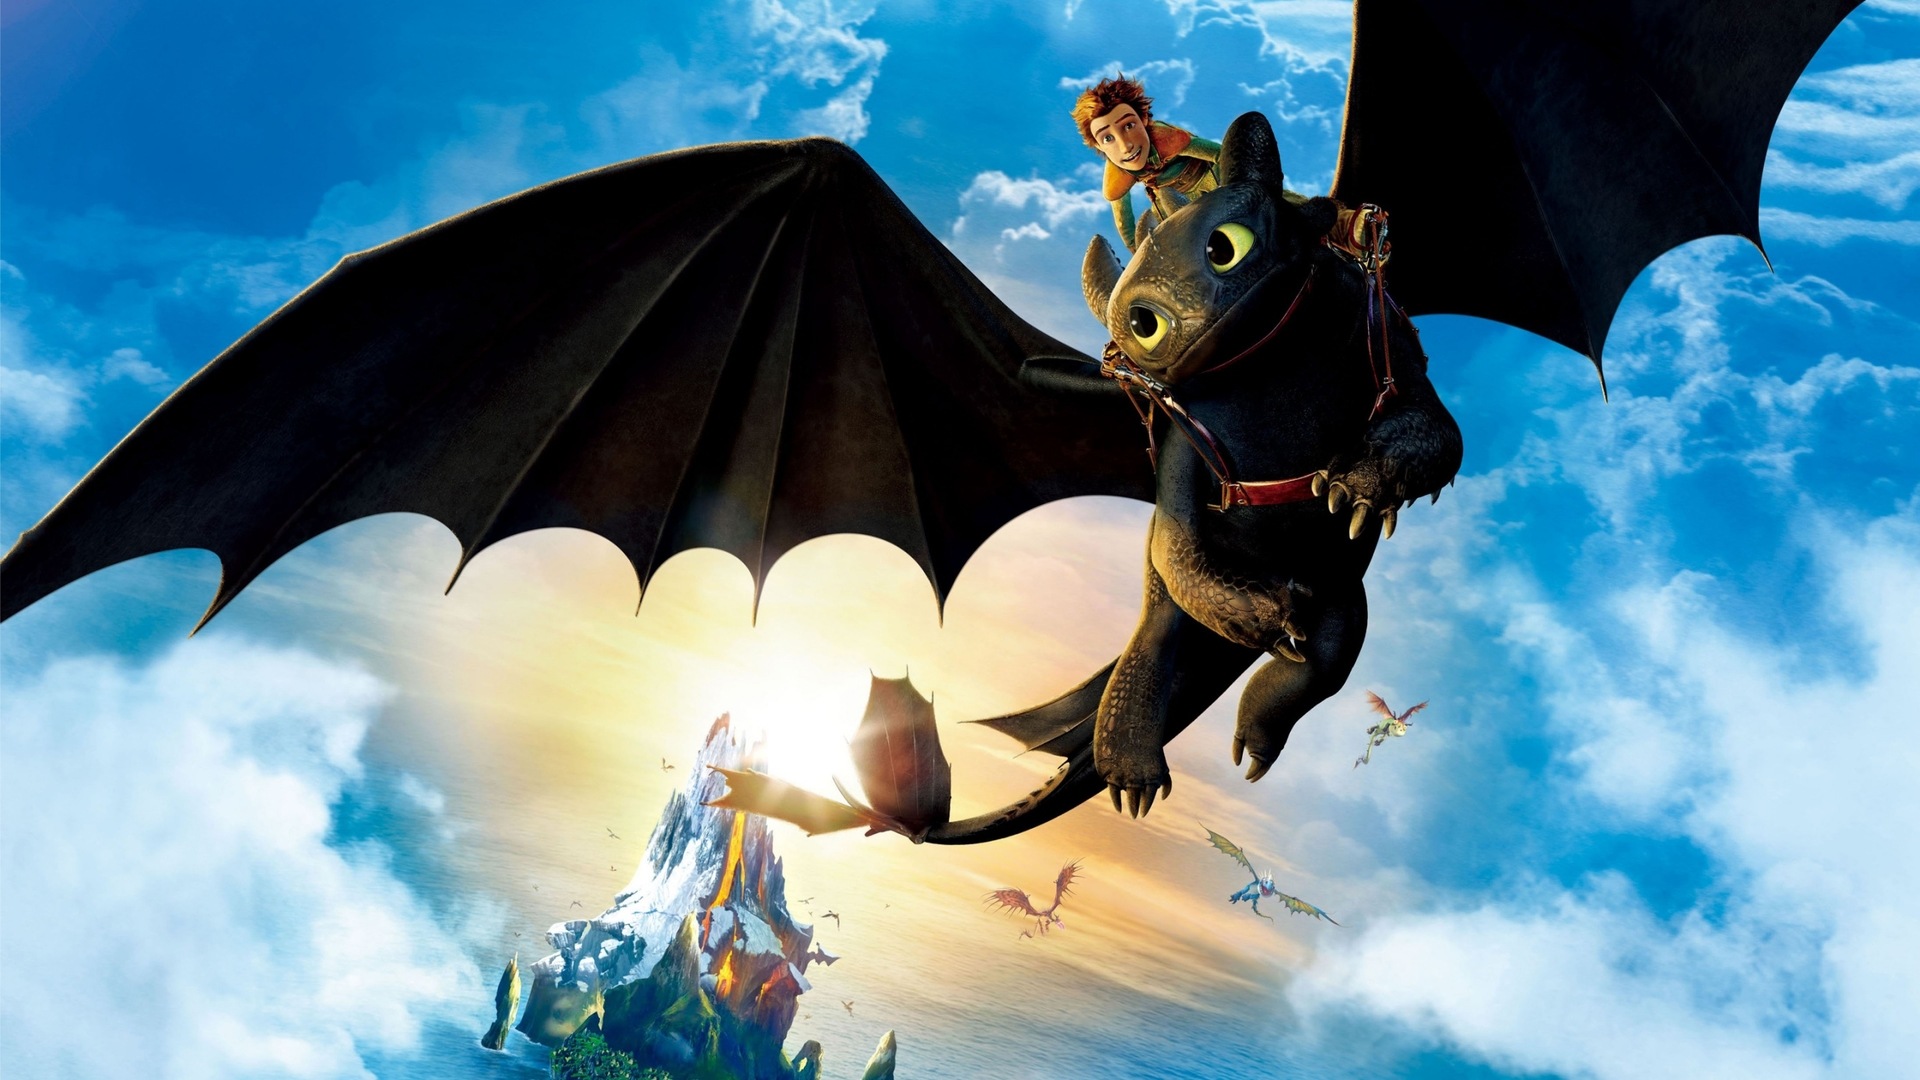 How to Train Your Dragon 2 HD wallpapers #1 - 1920x1080